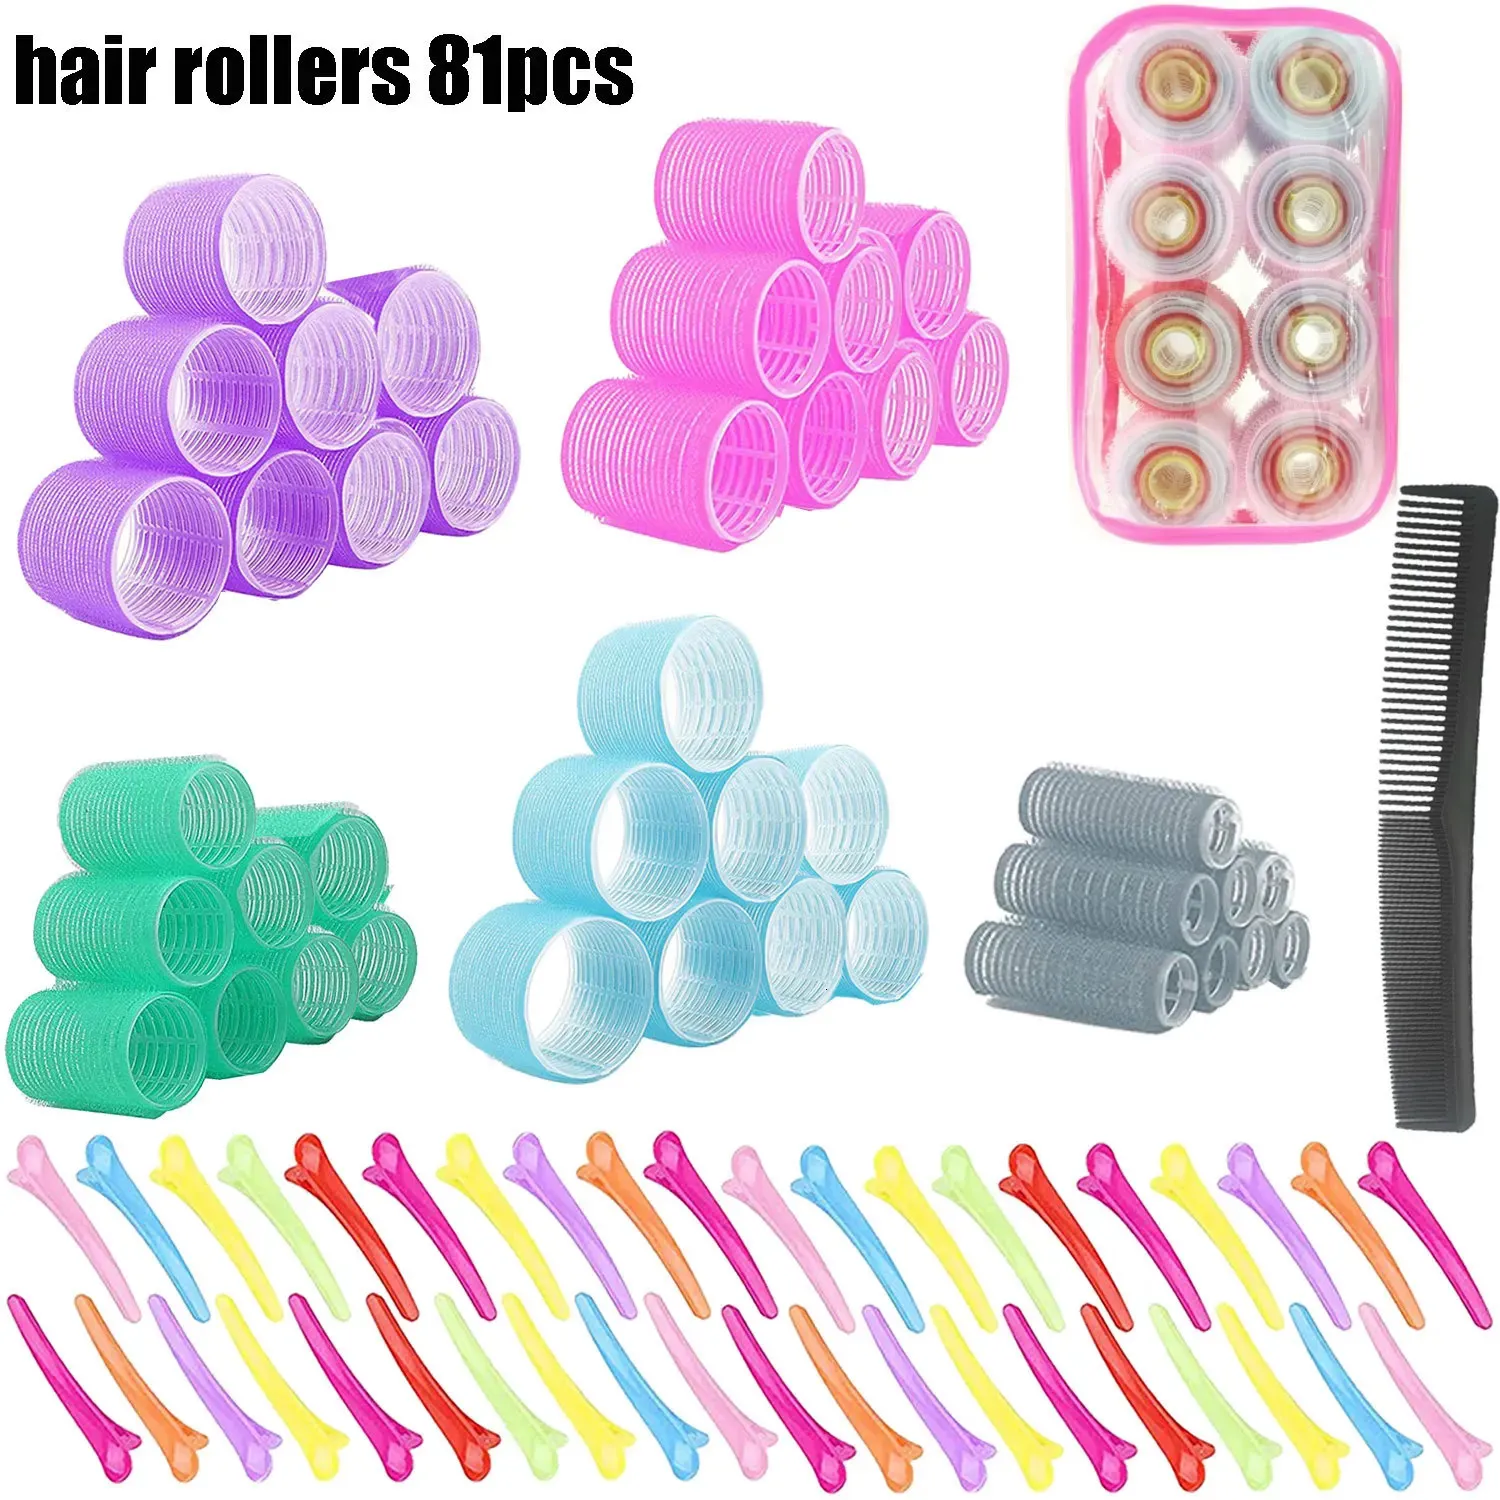 81Pcs Self Grip Hair Rollers Set Jumbo Size Hair Curlers Salon Hairdressing DIY Curling Hairstyling Tool with Comb Clips 240117